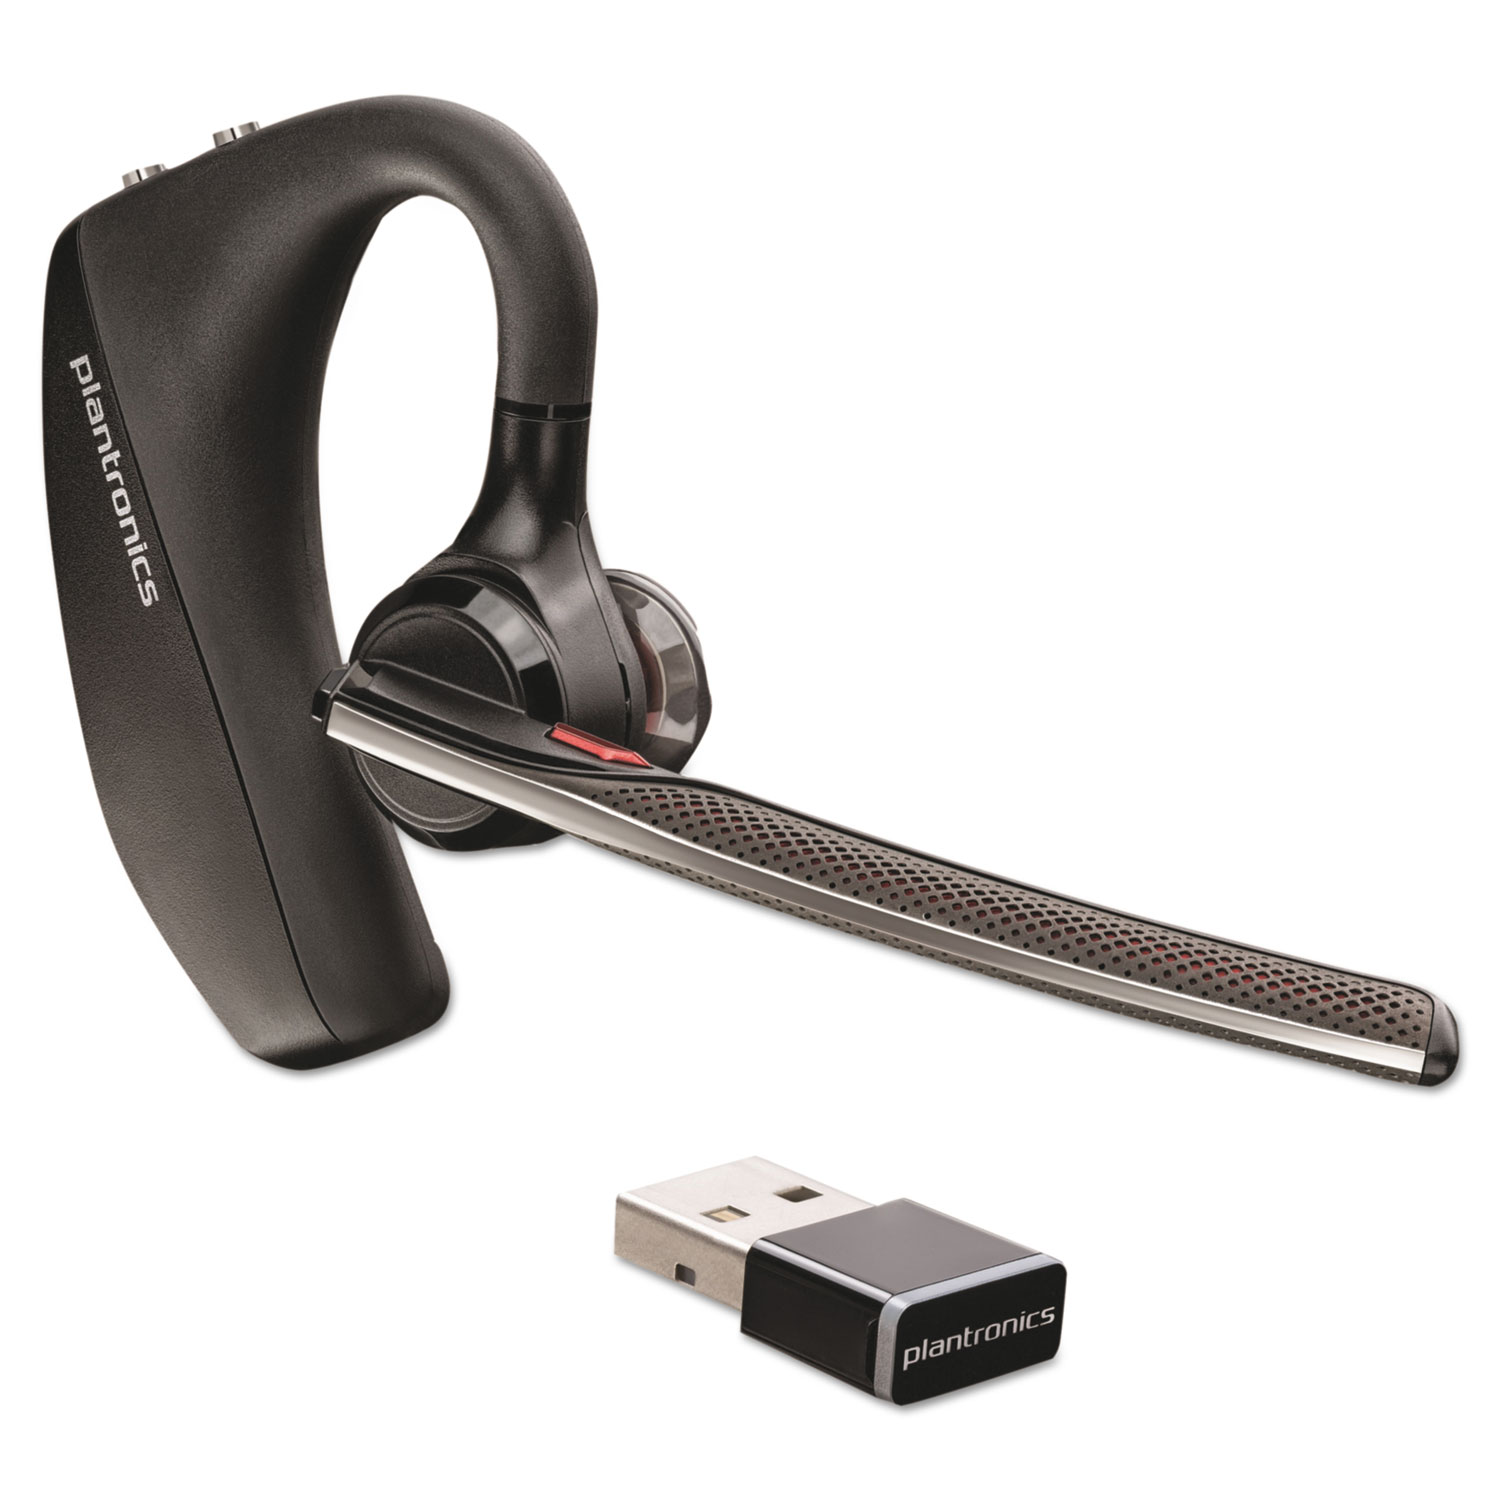  Plantronics 206110-101 Voyager 5200 UC Monaural Over-the-Ear Bluetooth Headset (PLNB5200) 